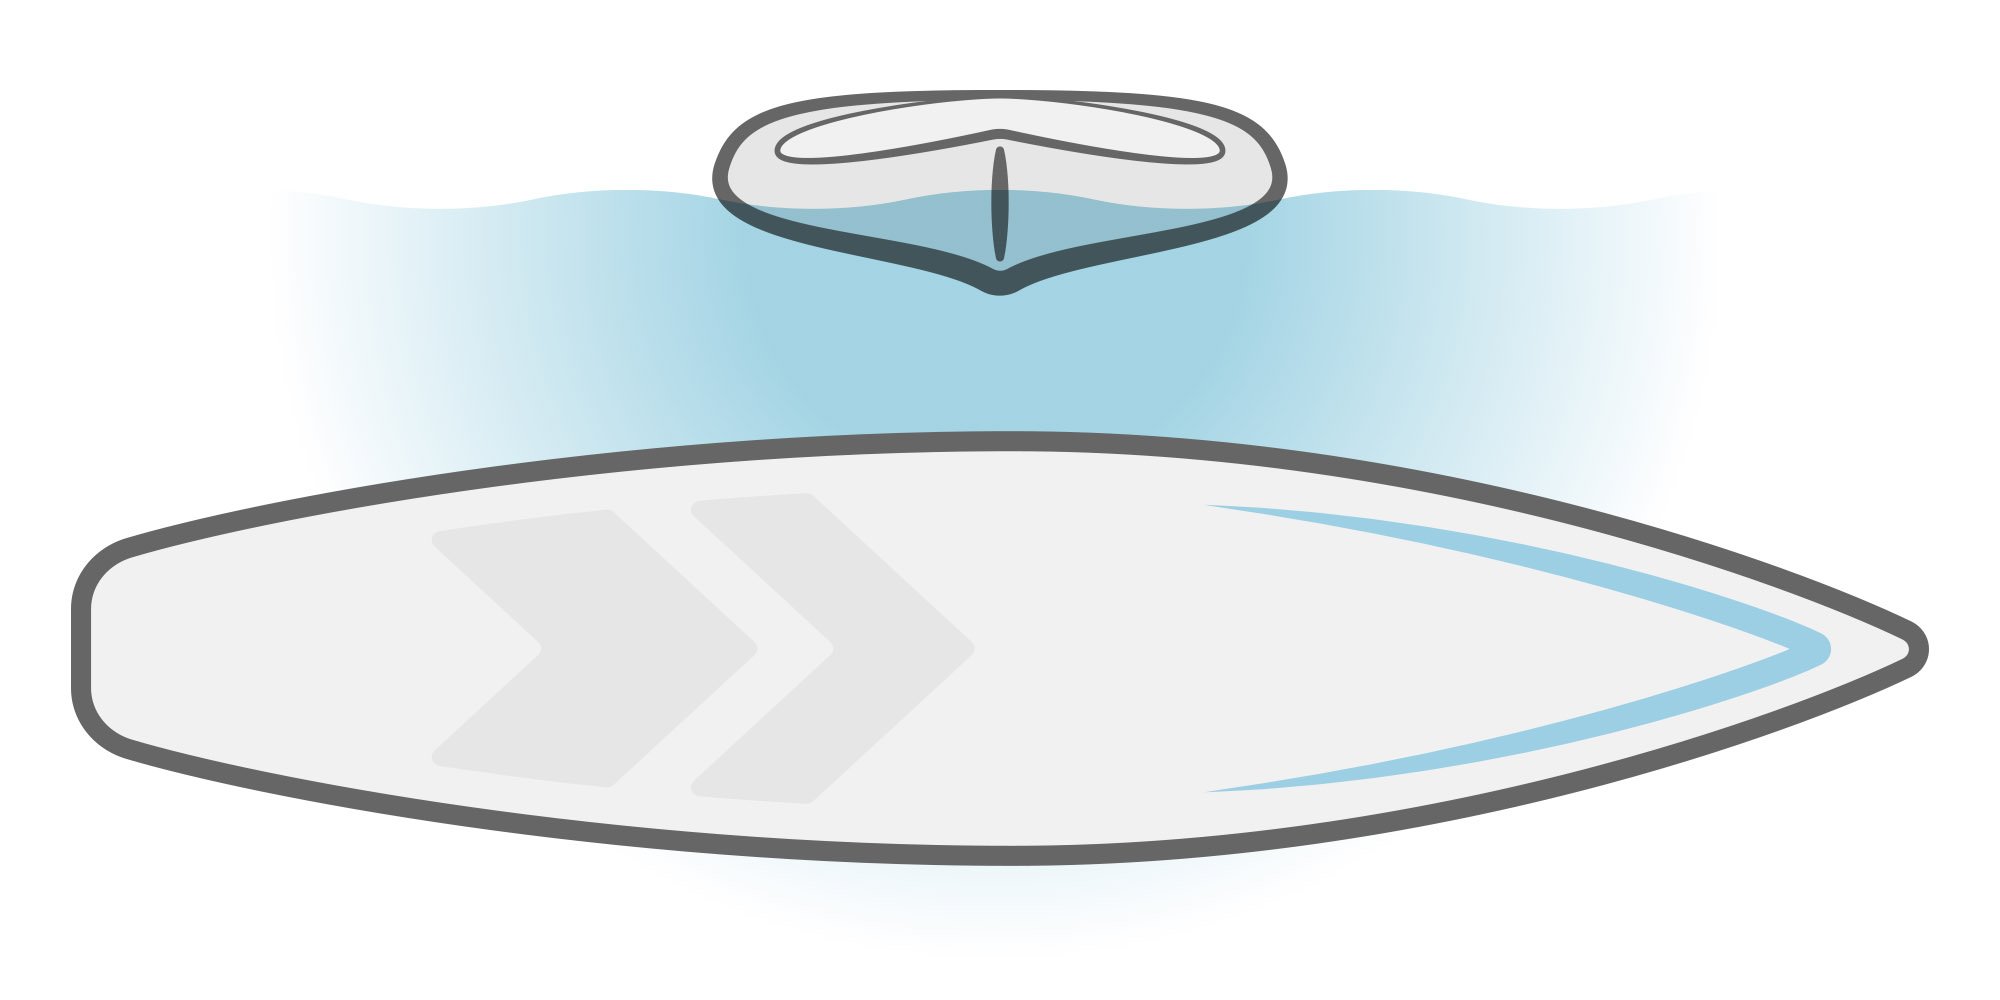 Illustration of SUP paddleboard with displacement hull.